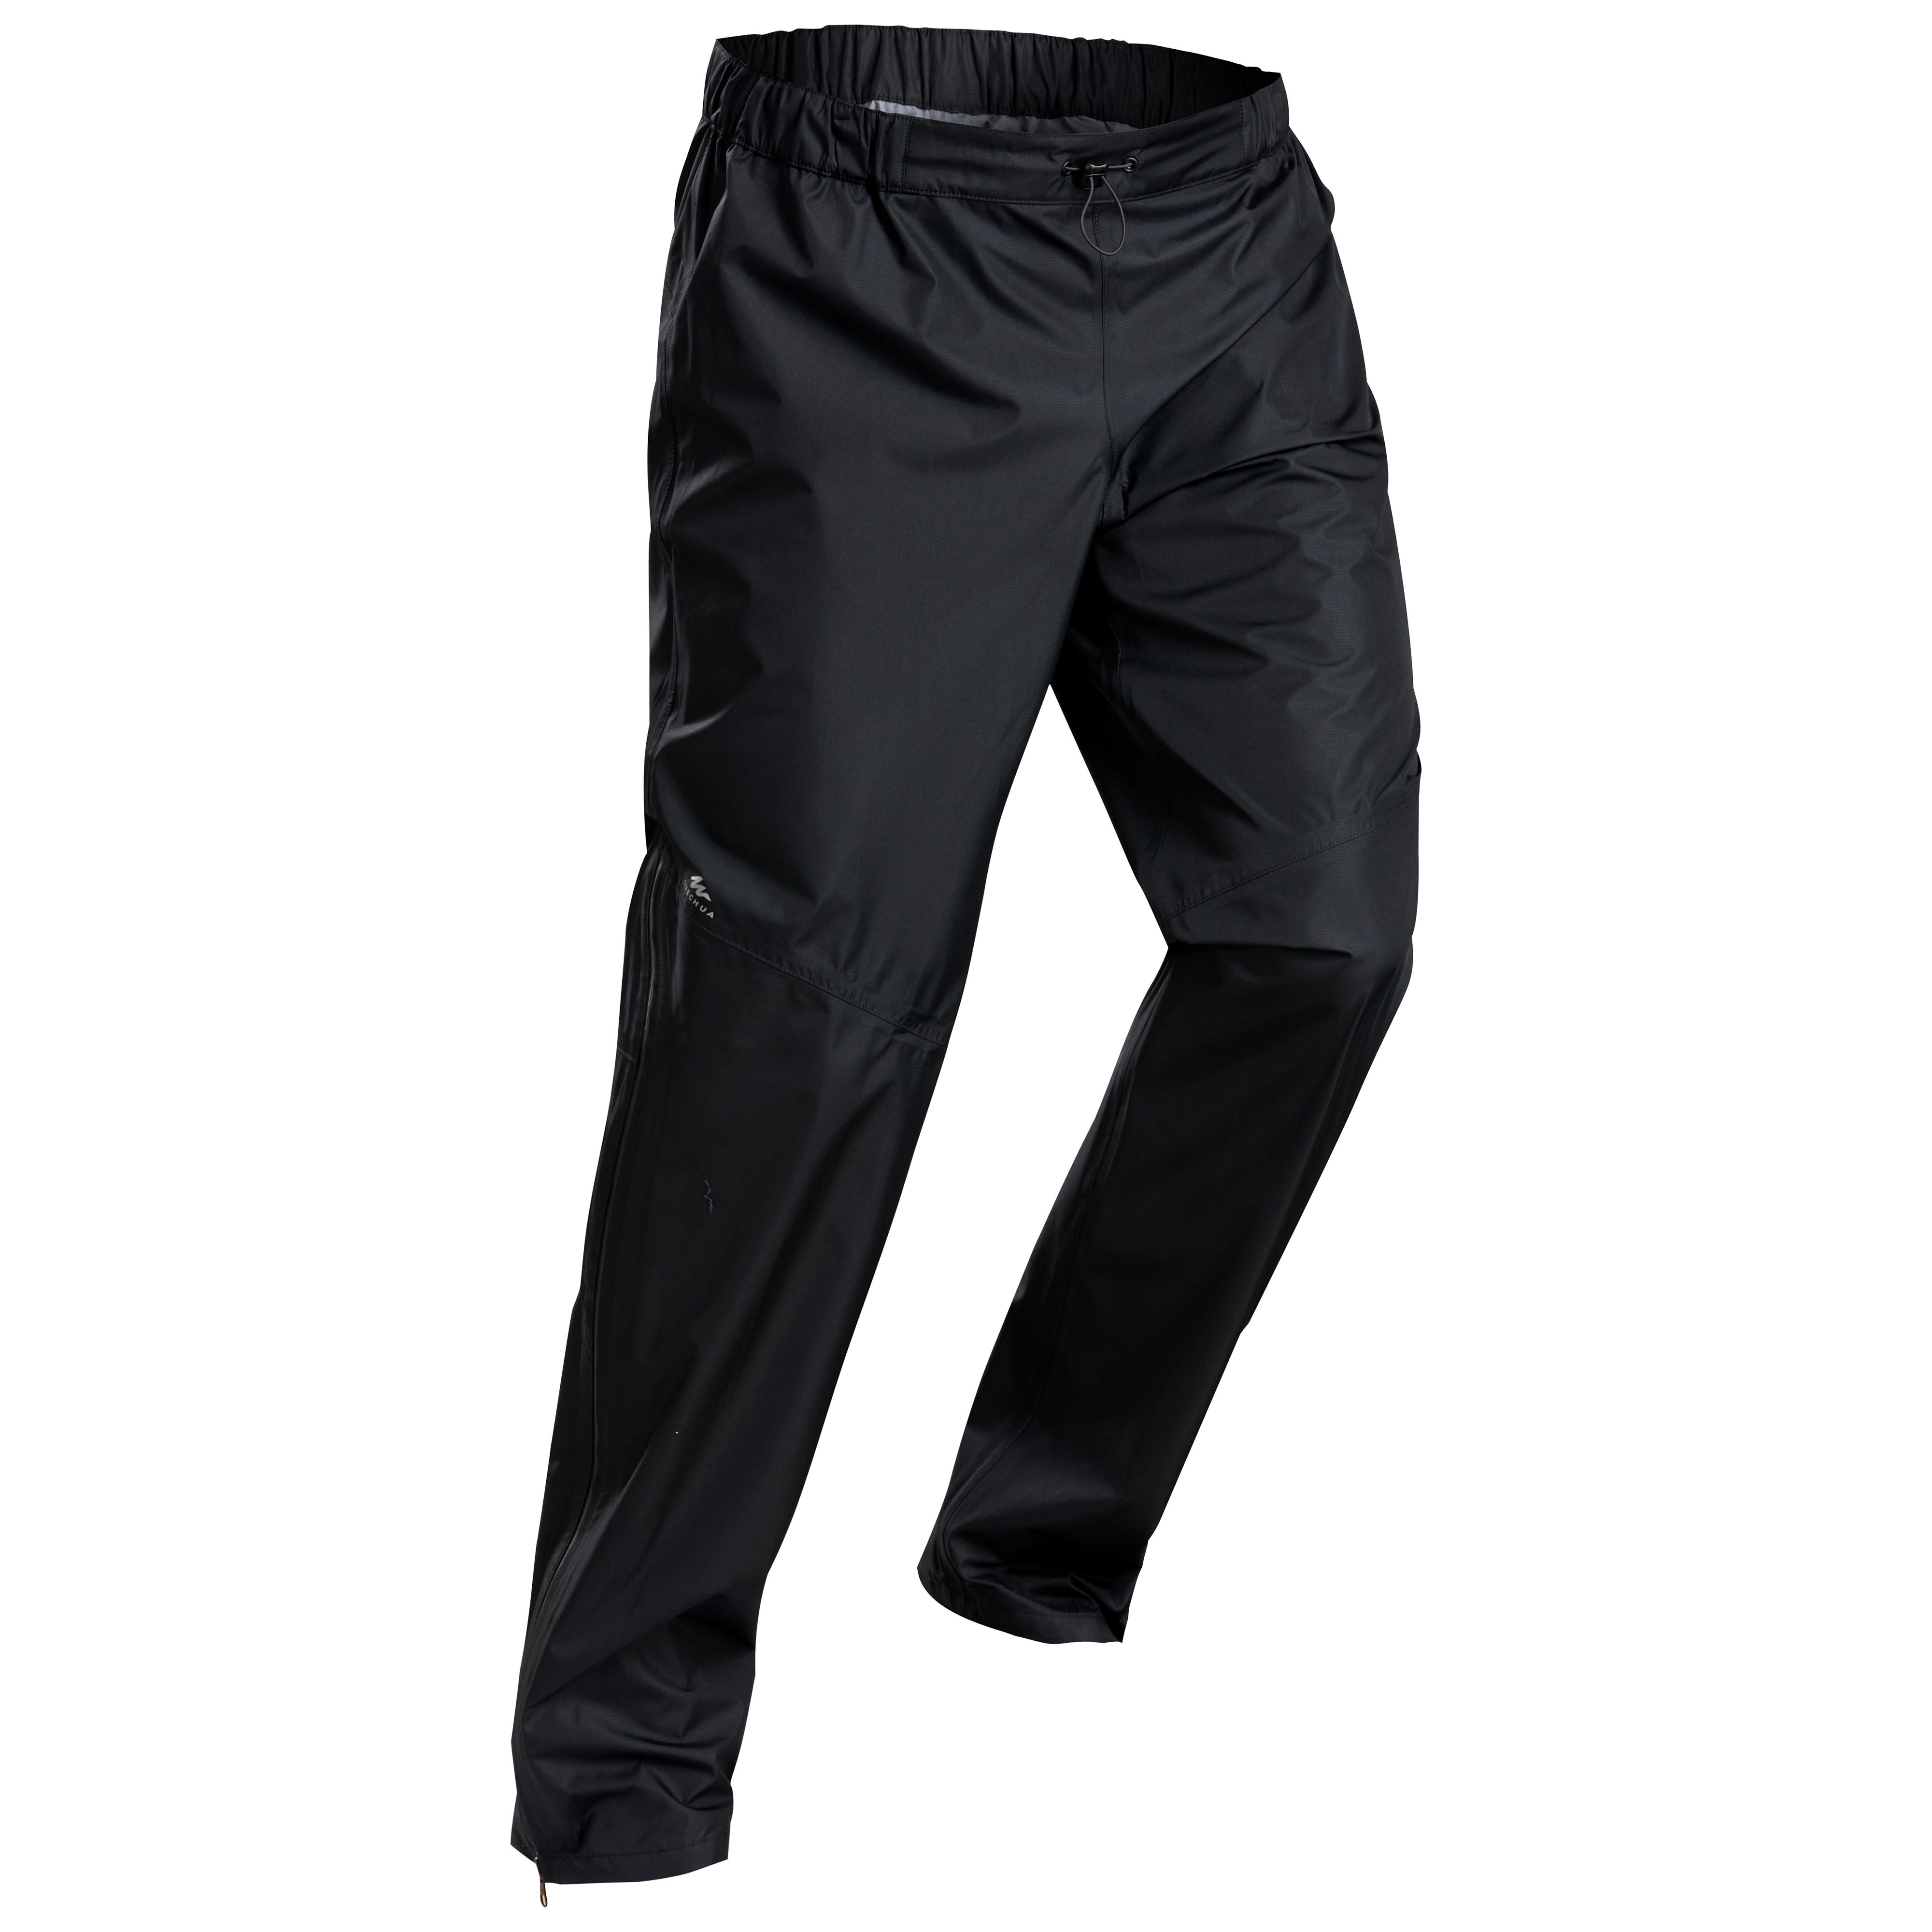 City Cycling Rain Overpantss with Built-In Overshoes 100 - Black | Decathlon